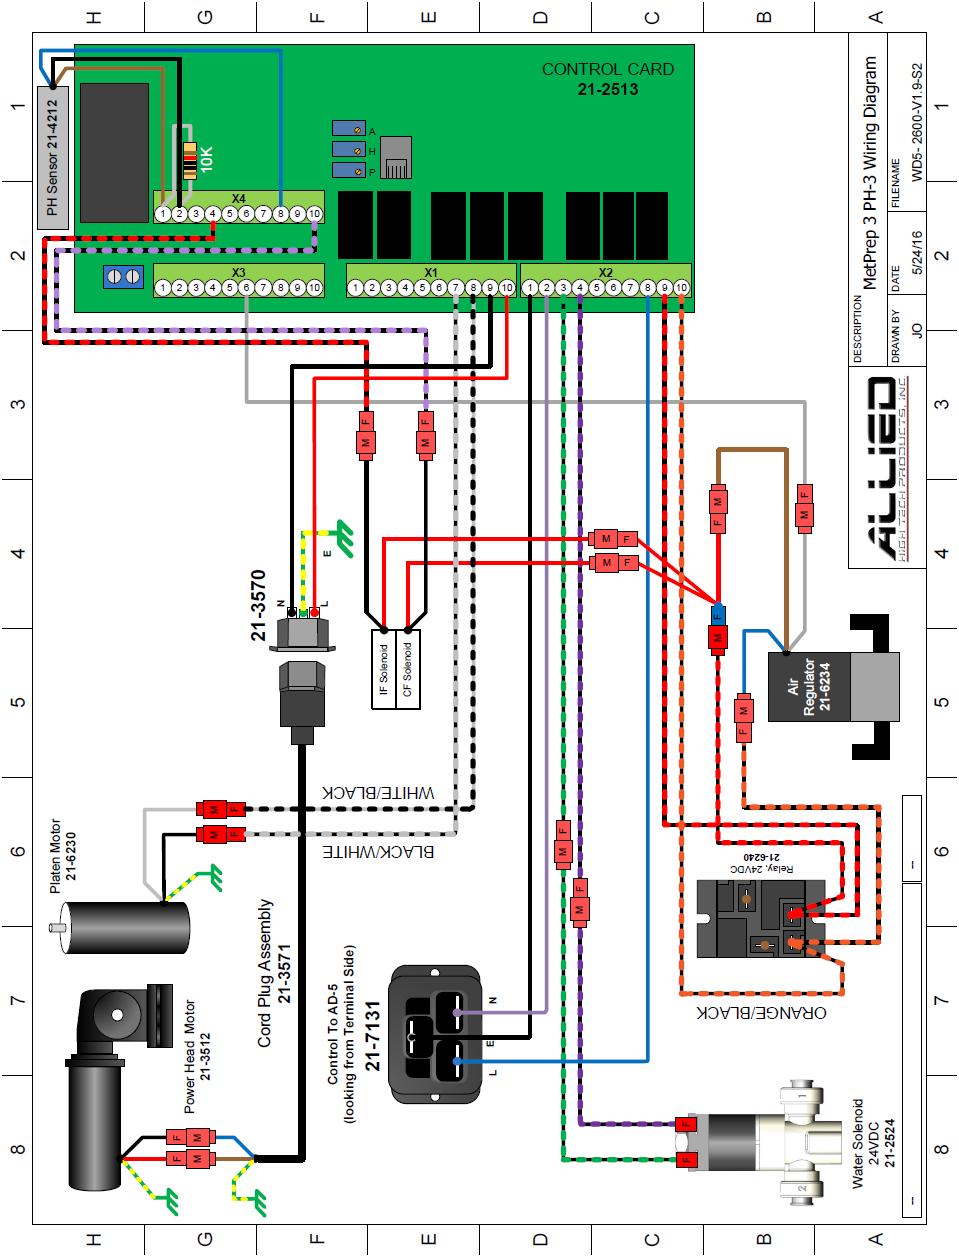 Wiring Diagrams Allied High Tech Products, Inc.